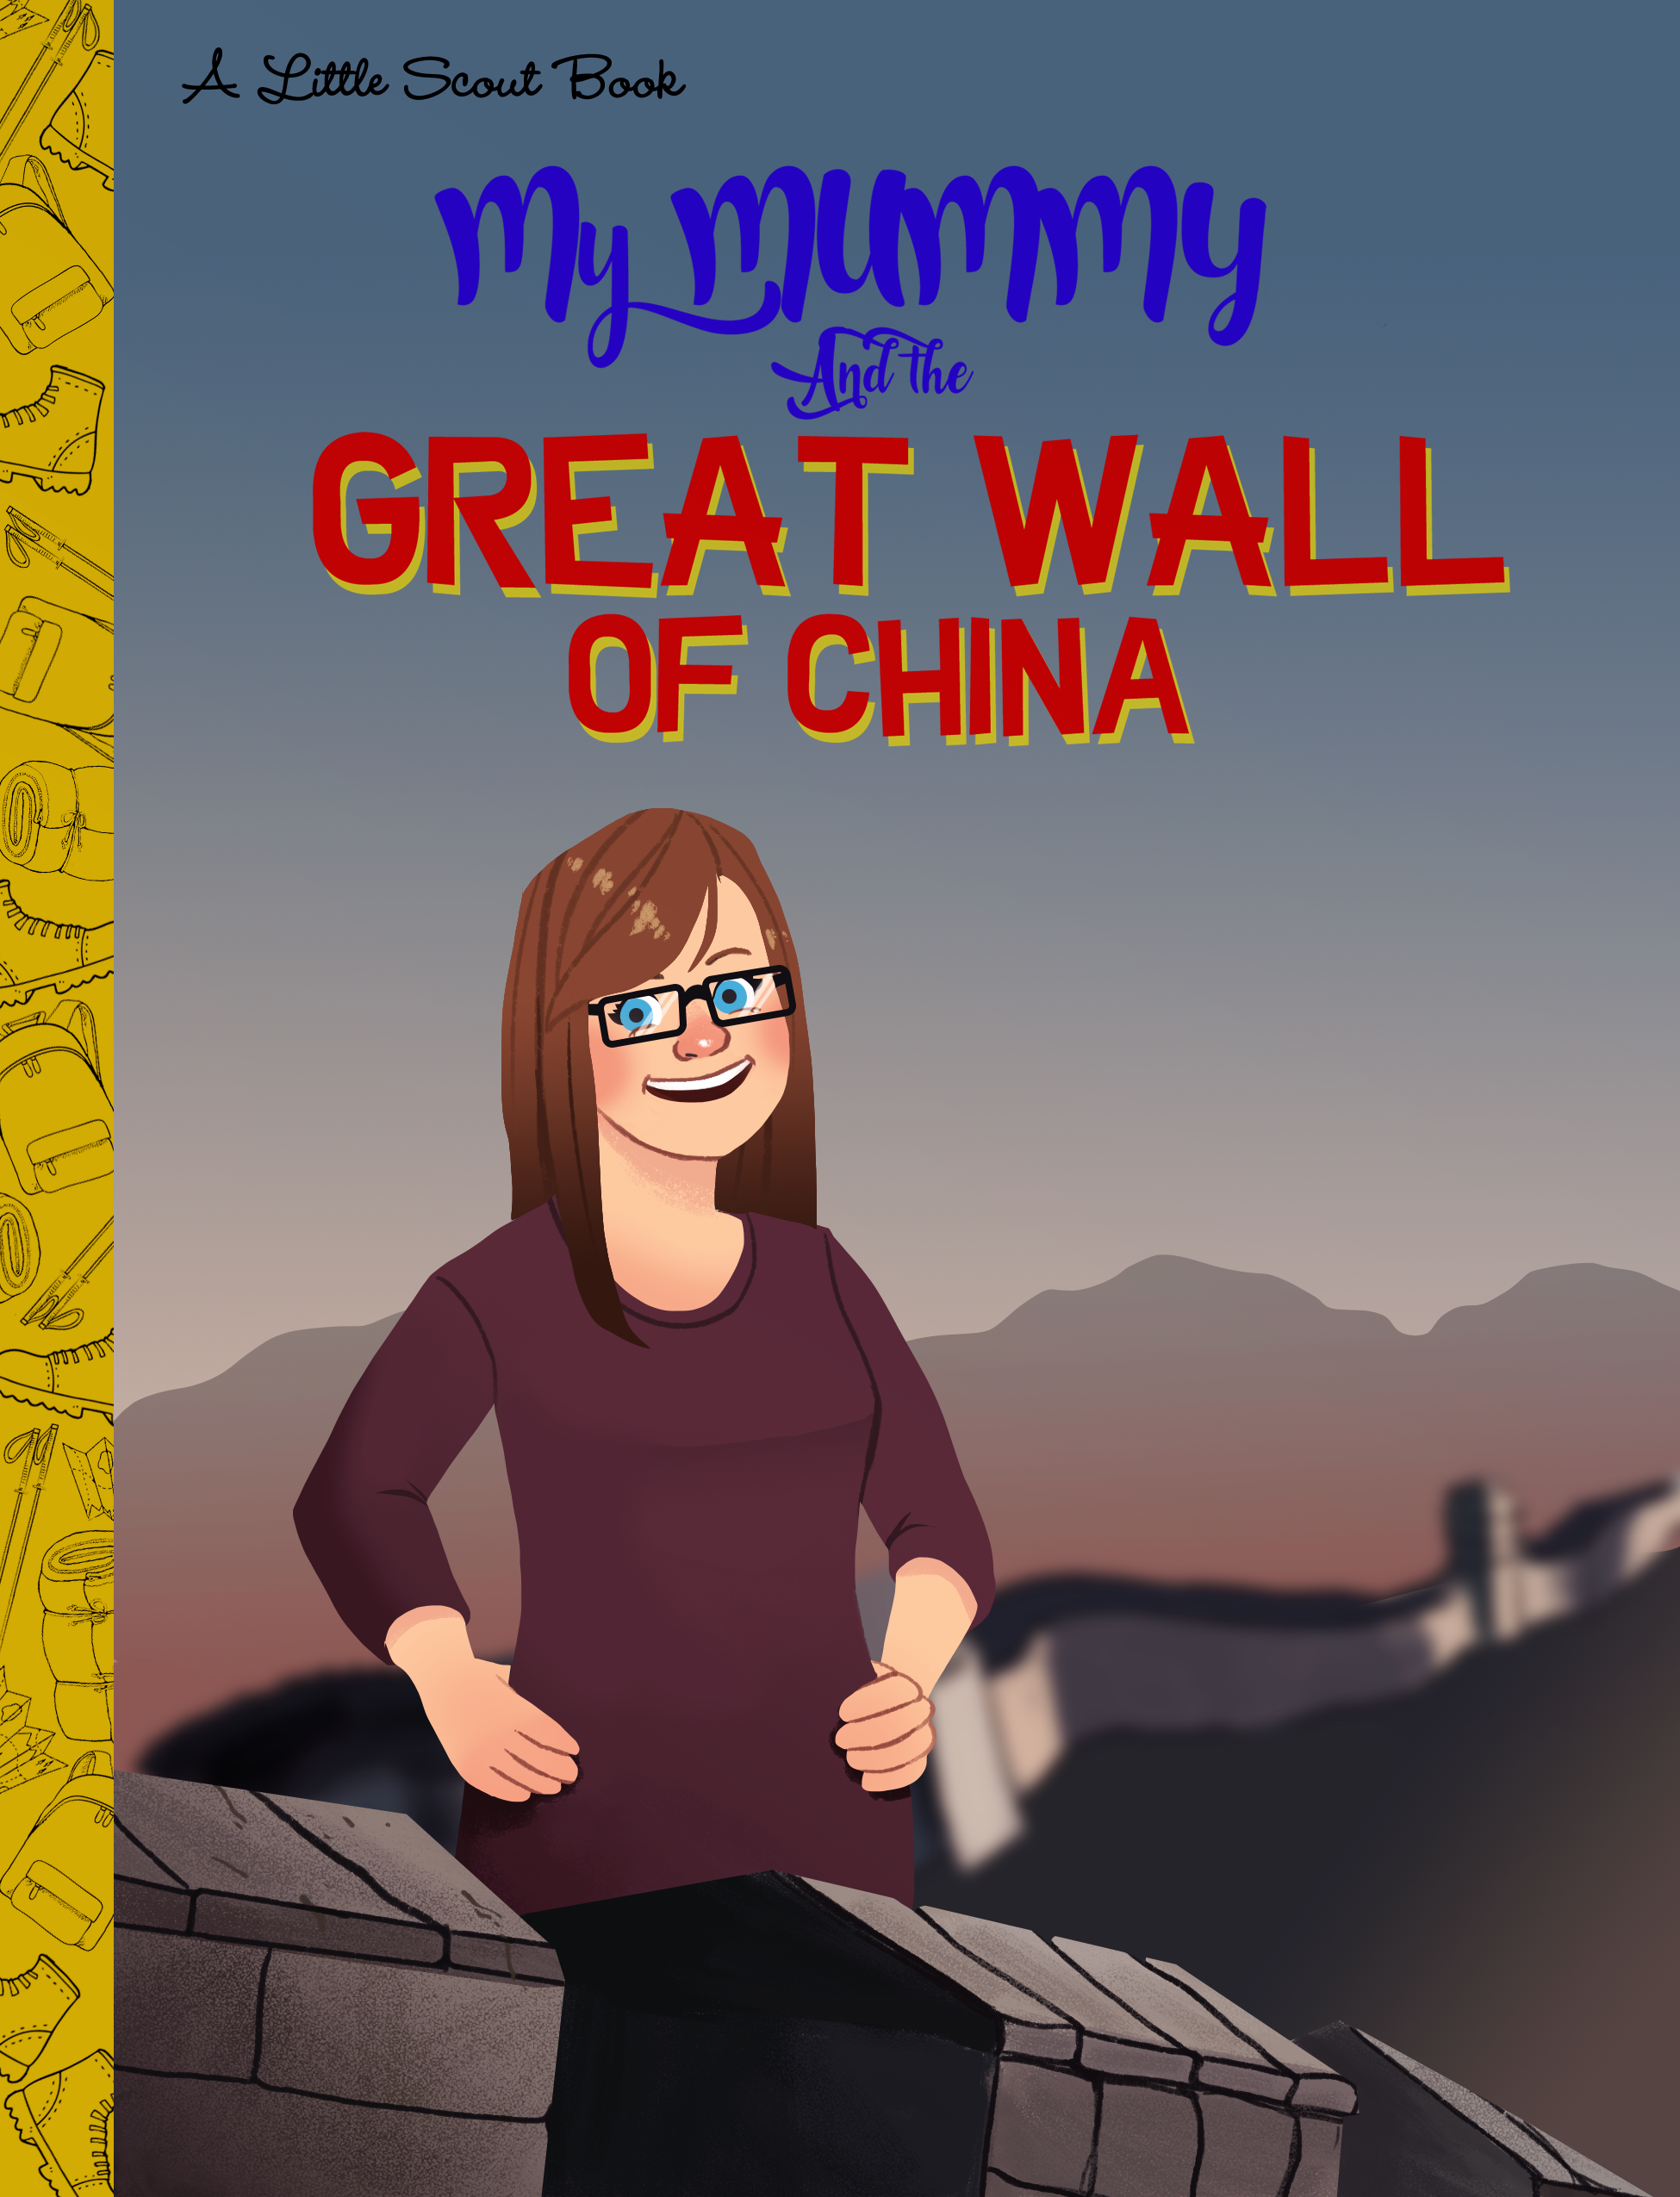  Client requested an illustration in the style of Quirk Books'&nbsp;Pop Classic Picture Books to celebrate his wife's charity walk across the Great Wall of China.   Adobe Photoshop   